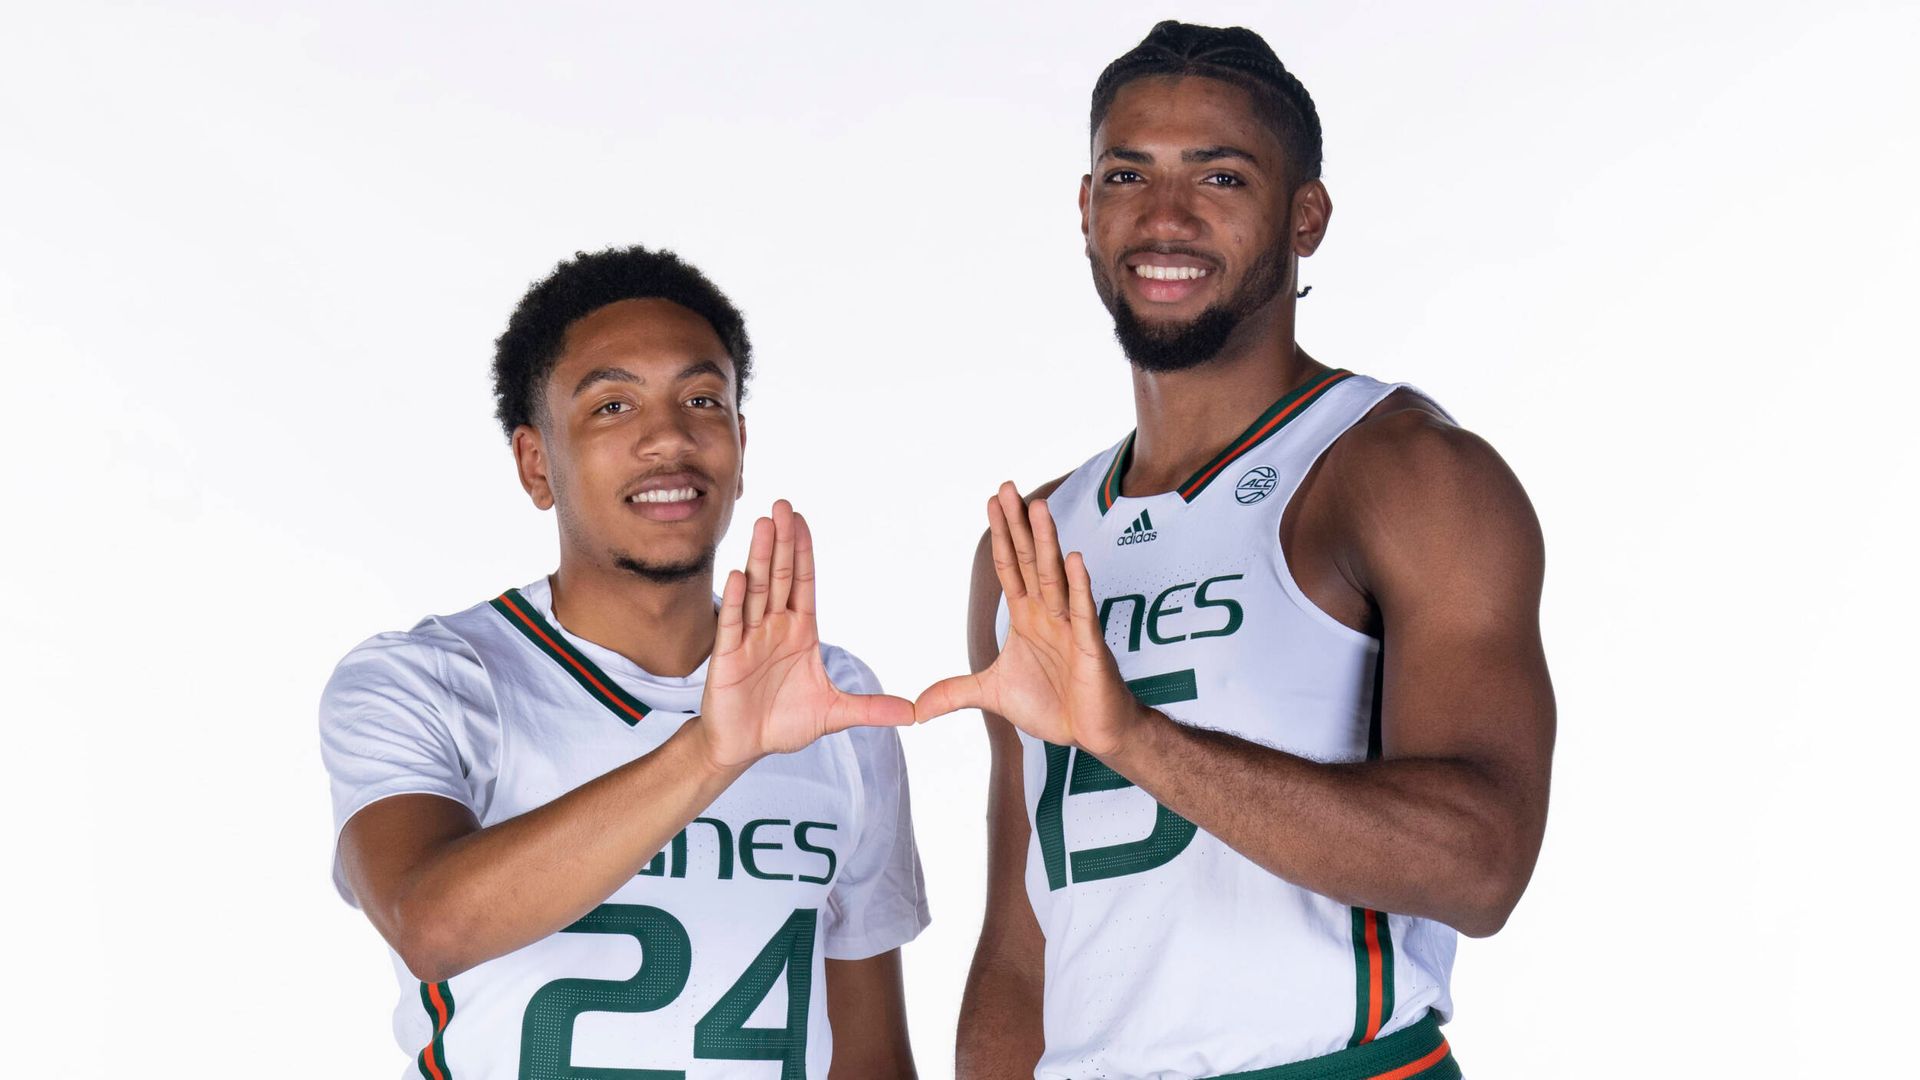 Pack and Omier Returning to Miami in 2023-24